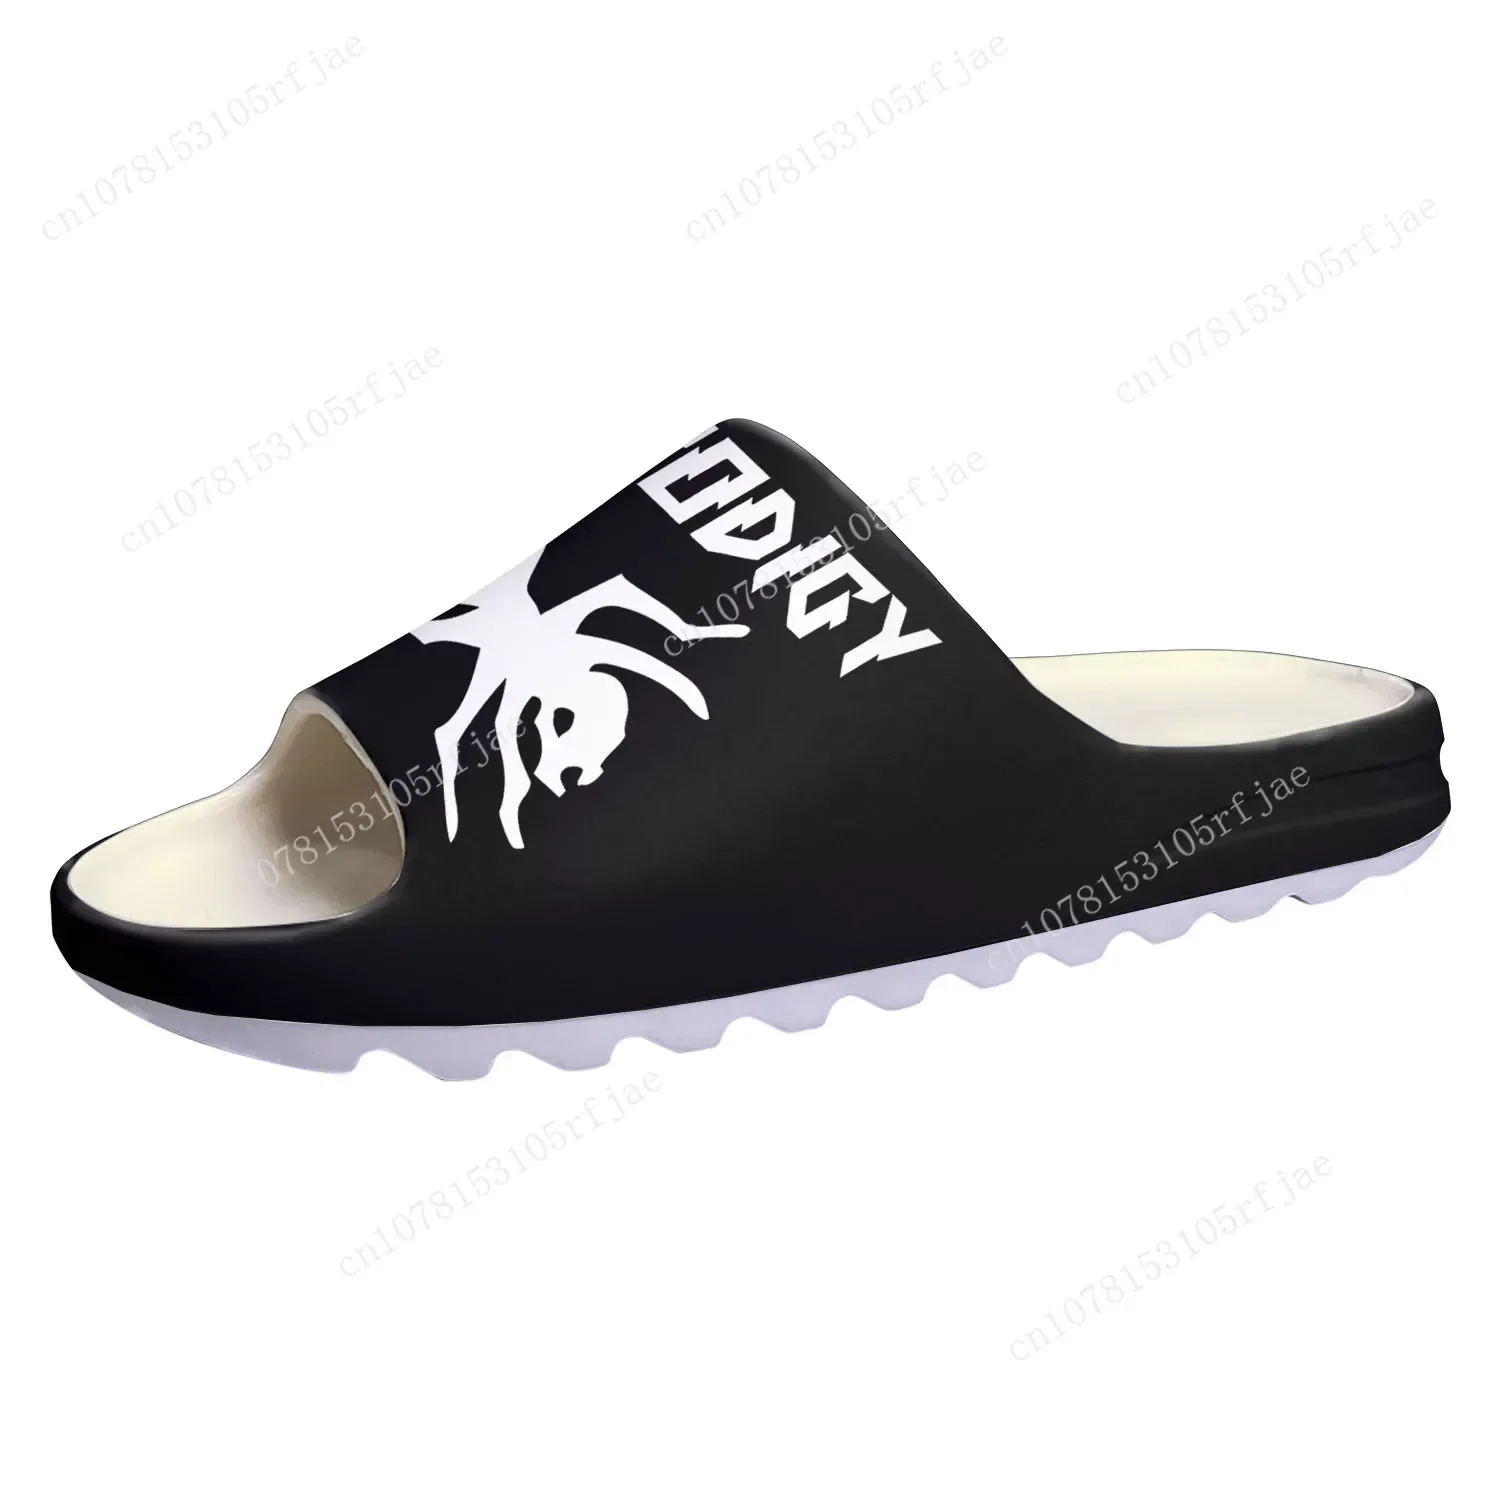 

The Prodigy Rock Band Soft Sole Sllipers Home Clogs Step on Water Shoes Mens Womens Teenager Bathroom Customize on Shit Sandals